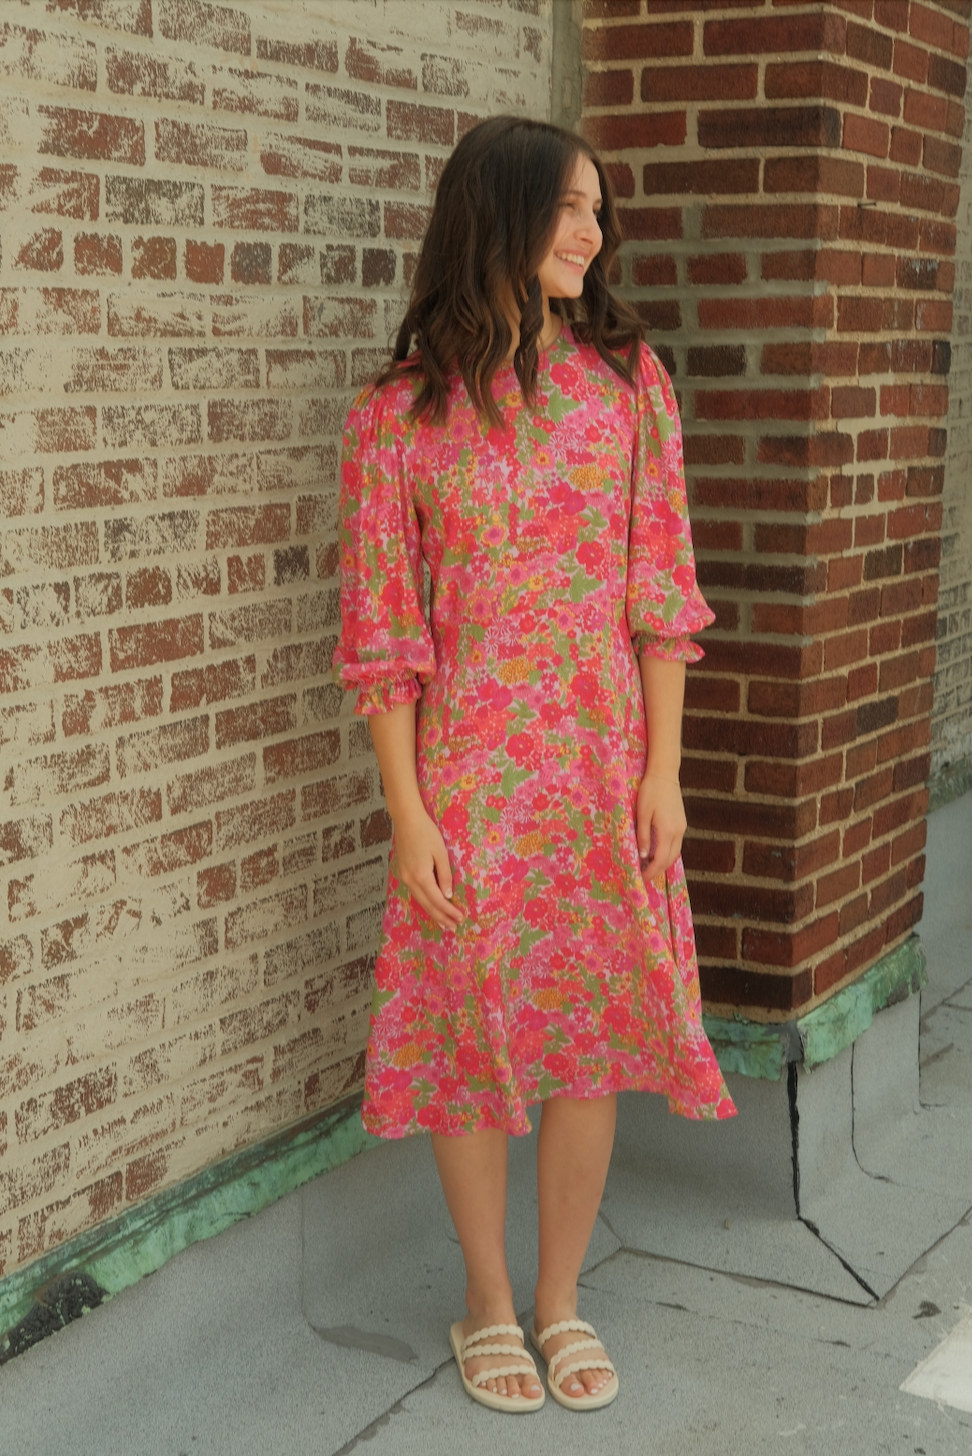 Modest flowy midi dress medium pink floral pattern sleeves cover the elbows